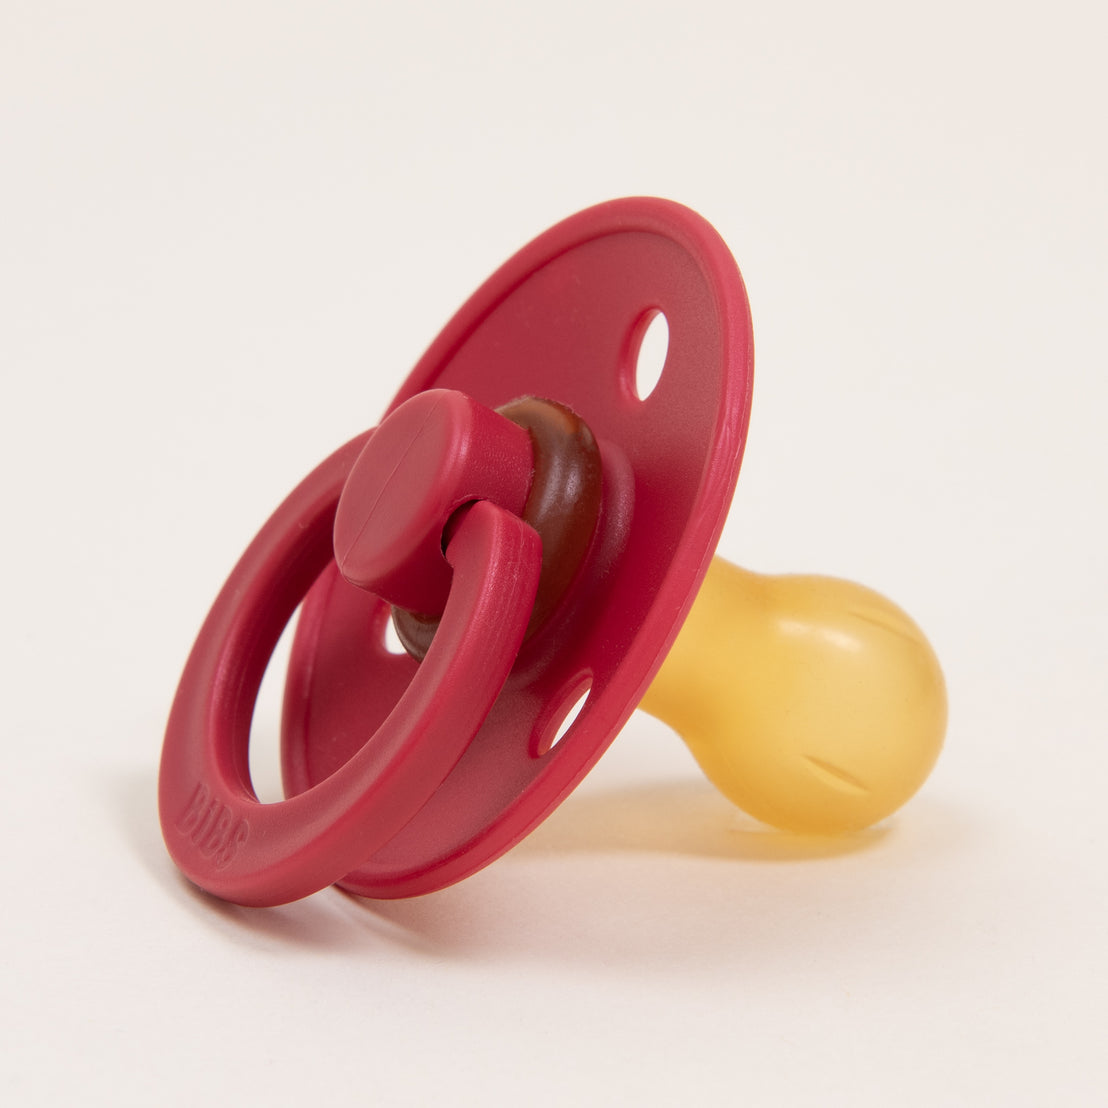 A Bibs Pacifier in Ruby with a natural translucent yellow nipple, set against a plain white background. The handle of the pacifier is ring-shaped and upscale.